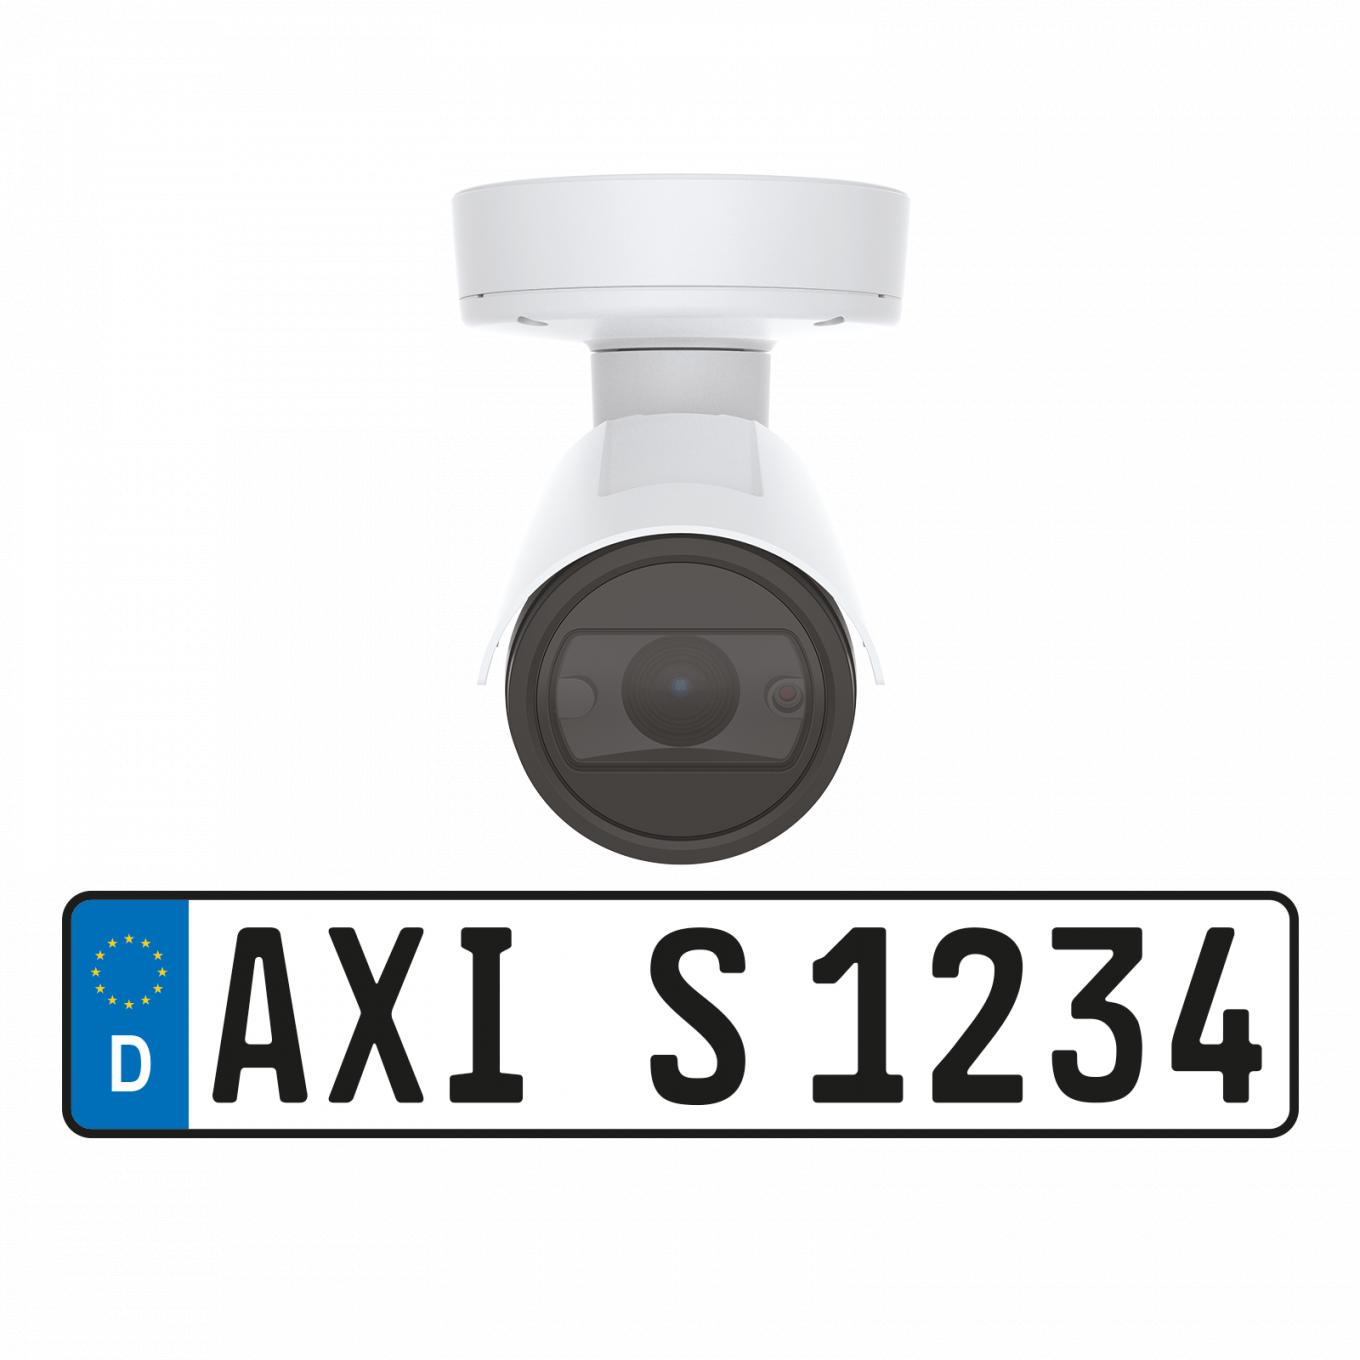 AXIS P1455-LE-3 License Plate Verifier Kit, viewed from its front